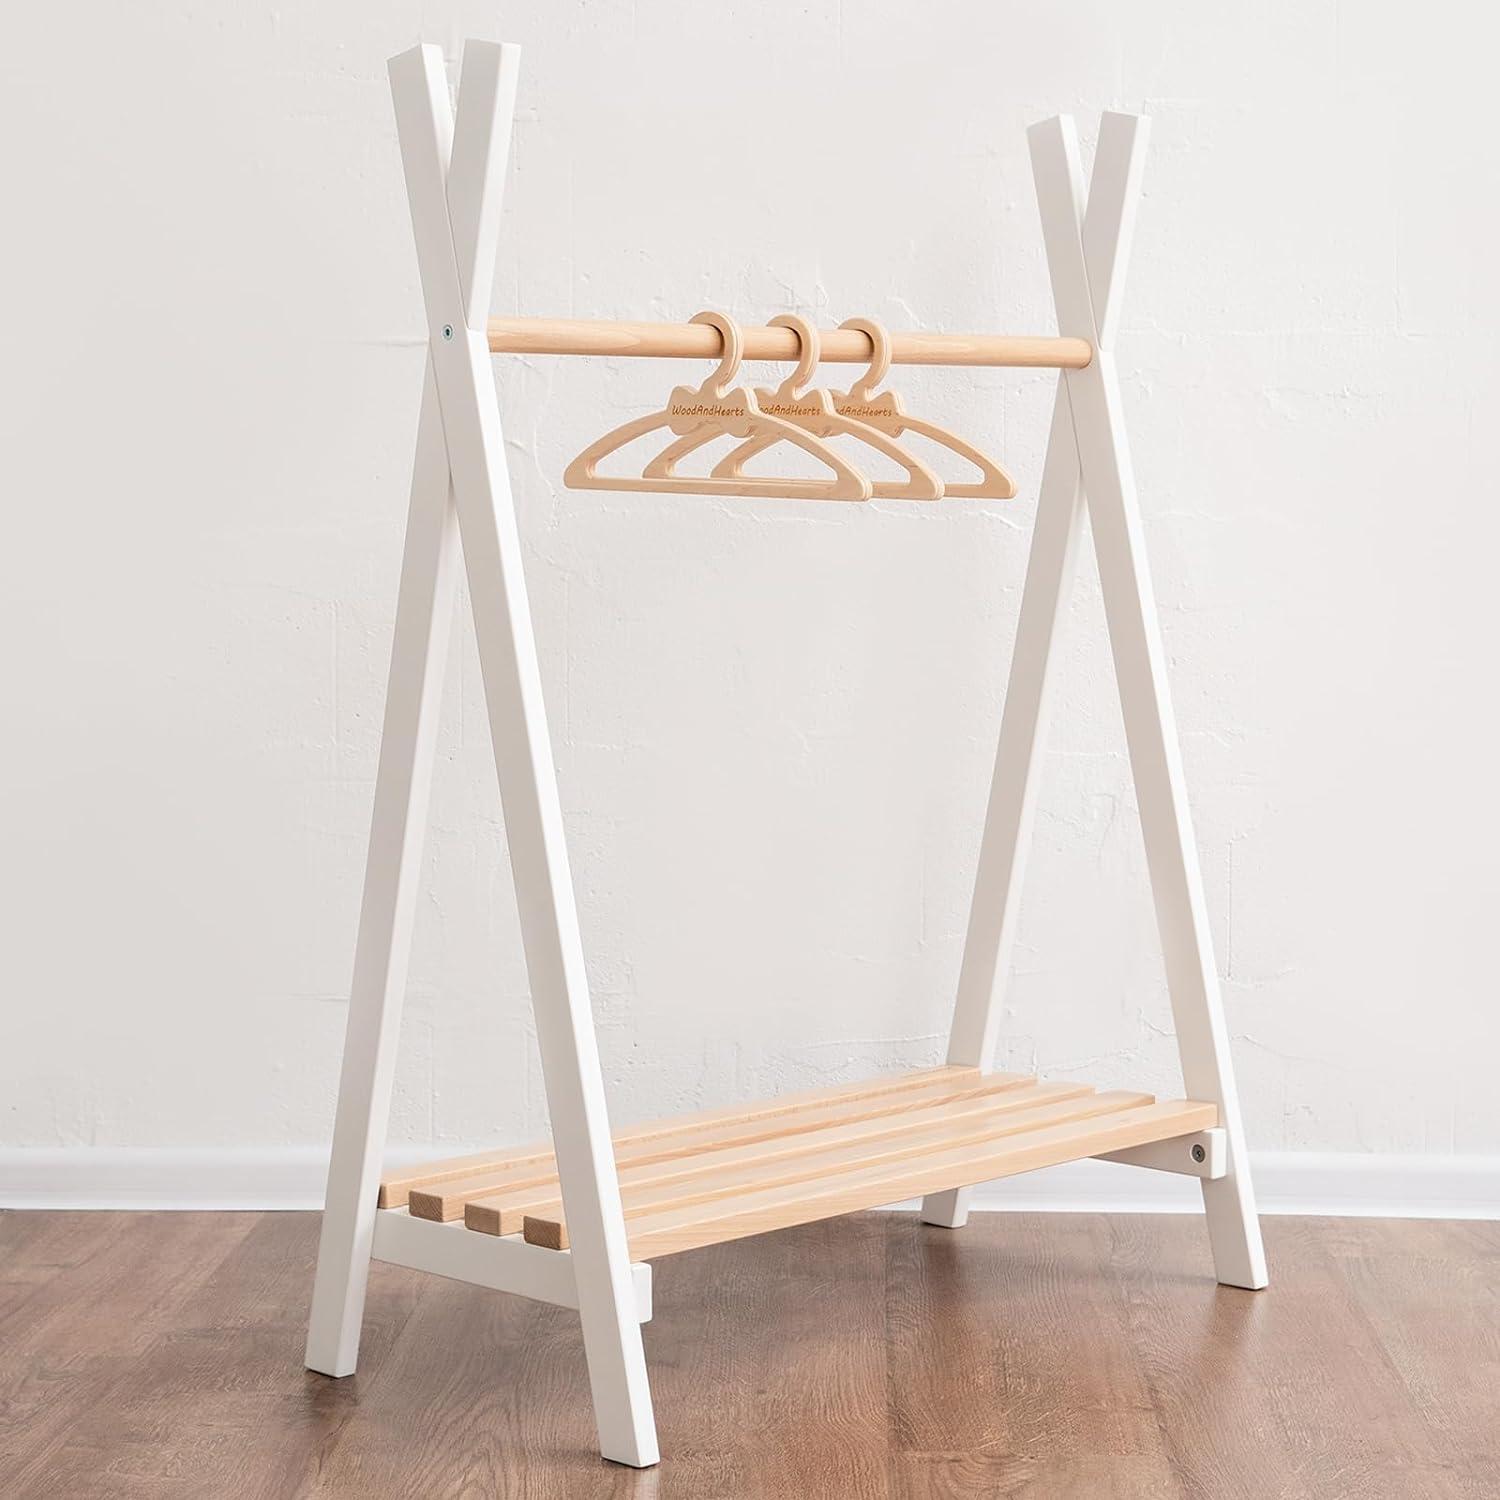 Montessori Wood and Hearts Teepee Clothing Rack With Wooden Hangers Natural Wood 3 Pieces Bow